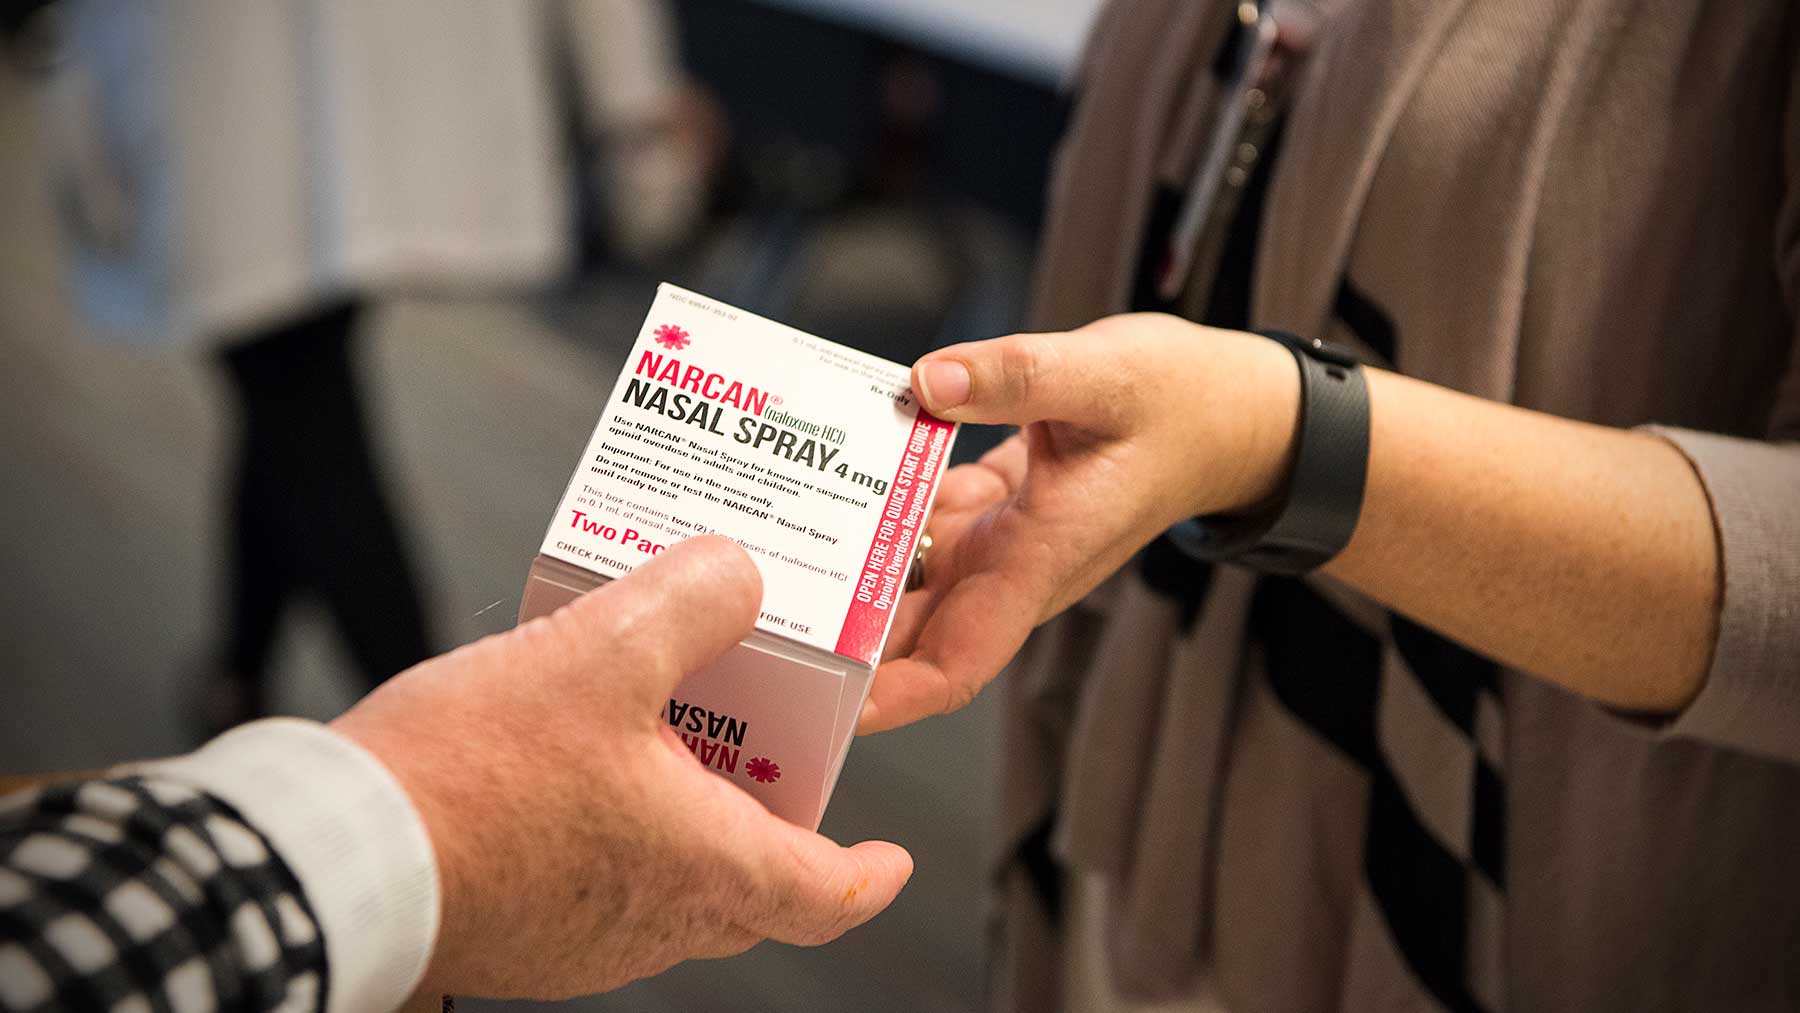 one person giving another person a Narcan kit